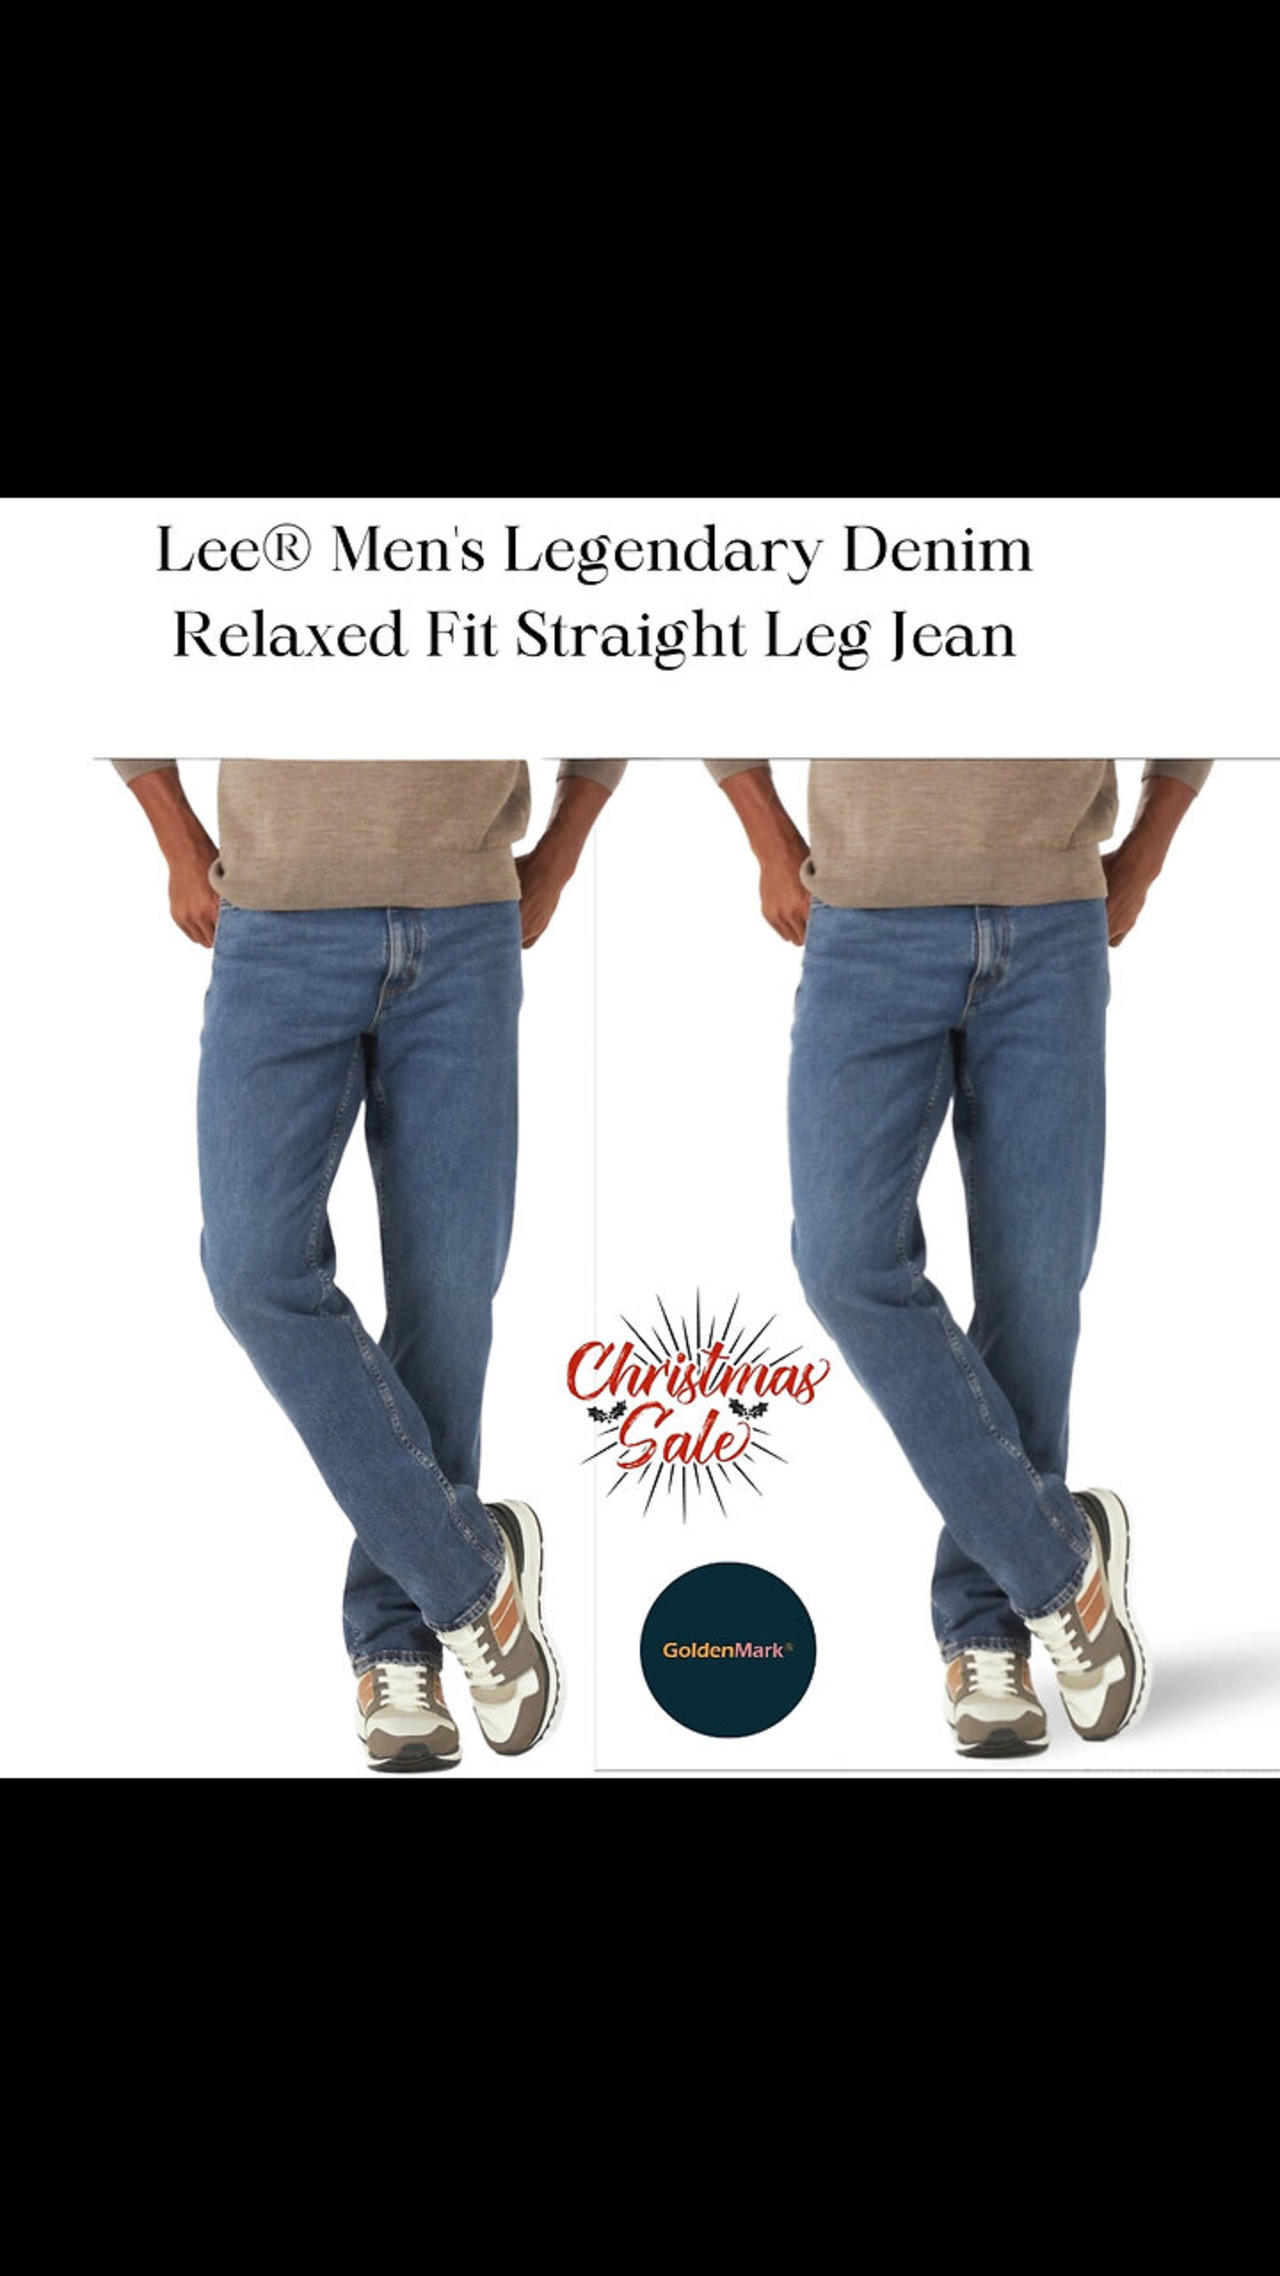 Lee® Men's Legendary Denim Relaxed Fit - One News Page VIDEO